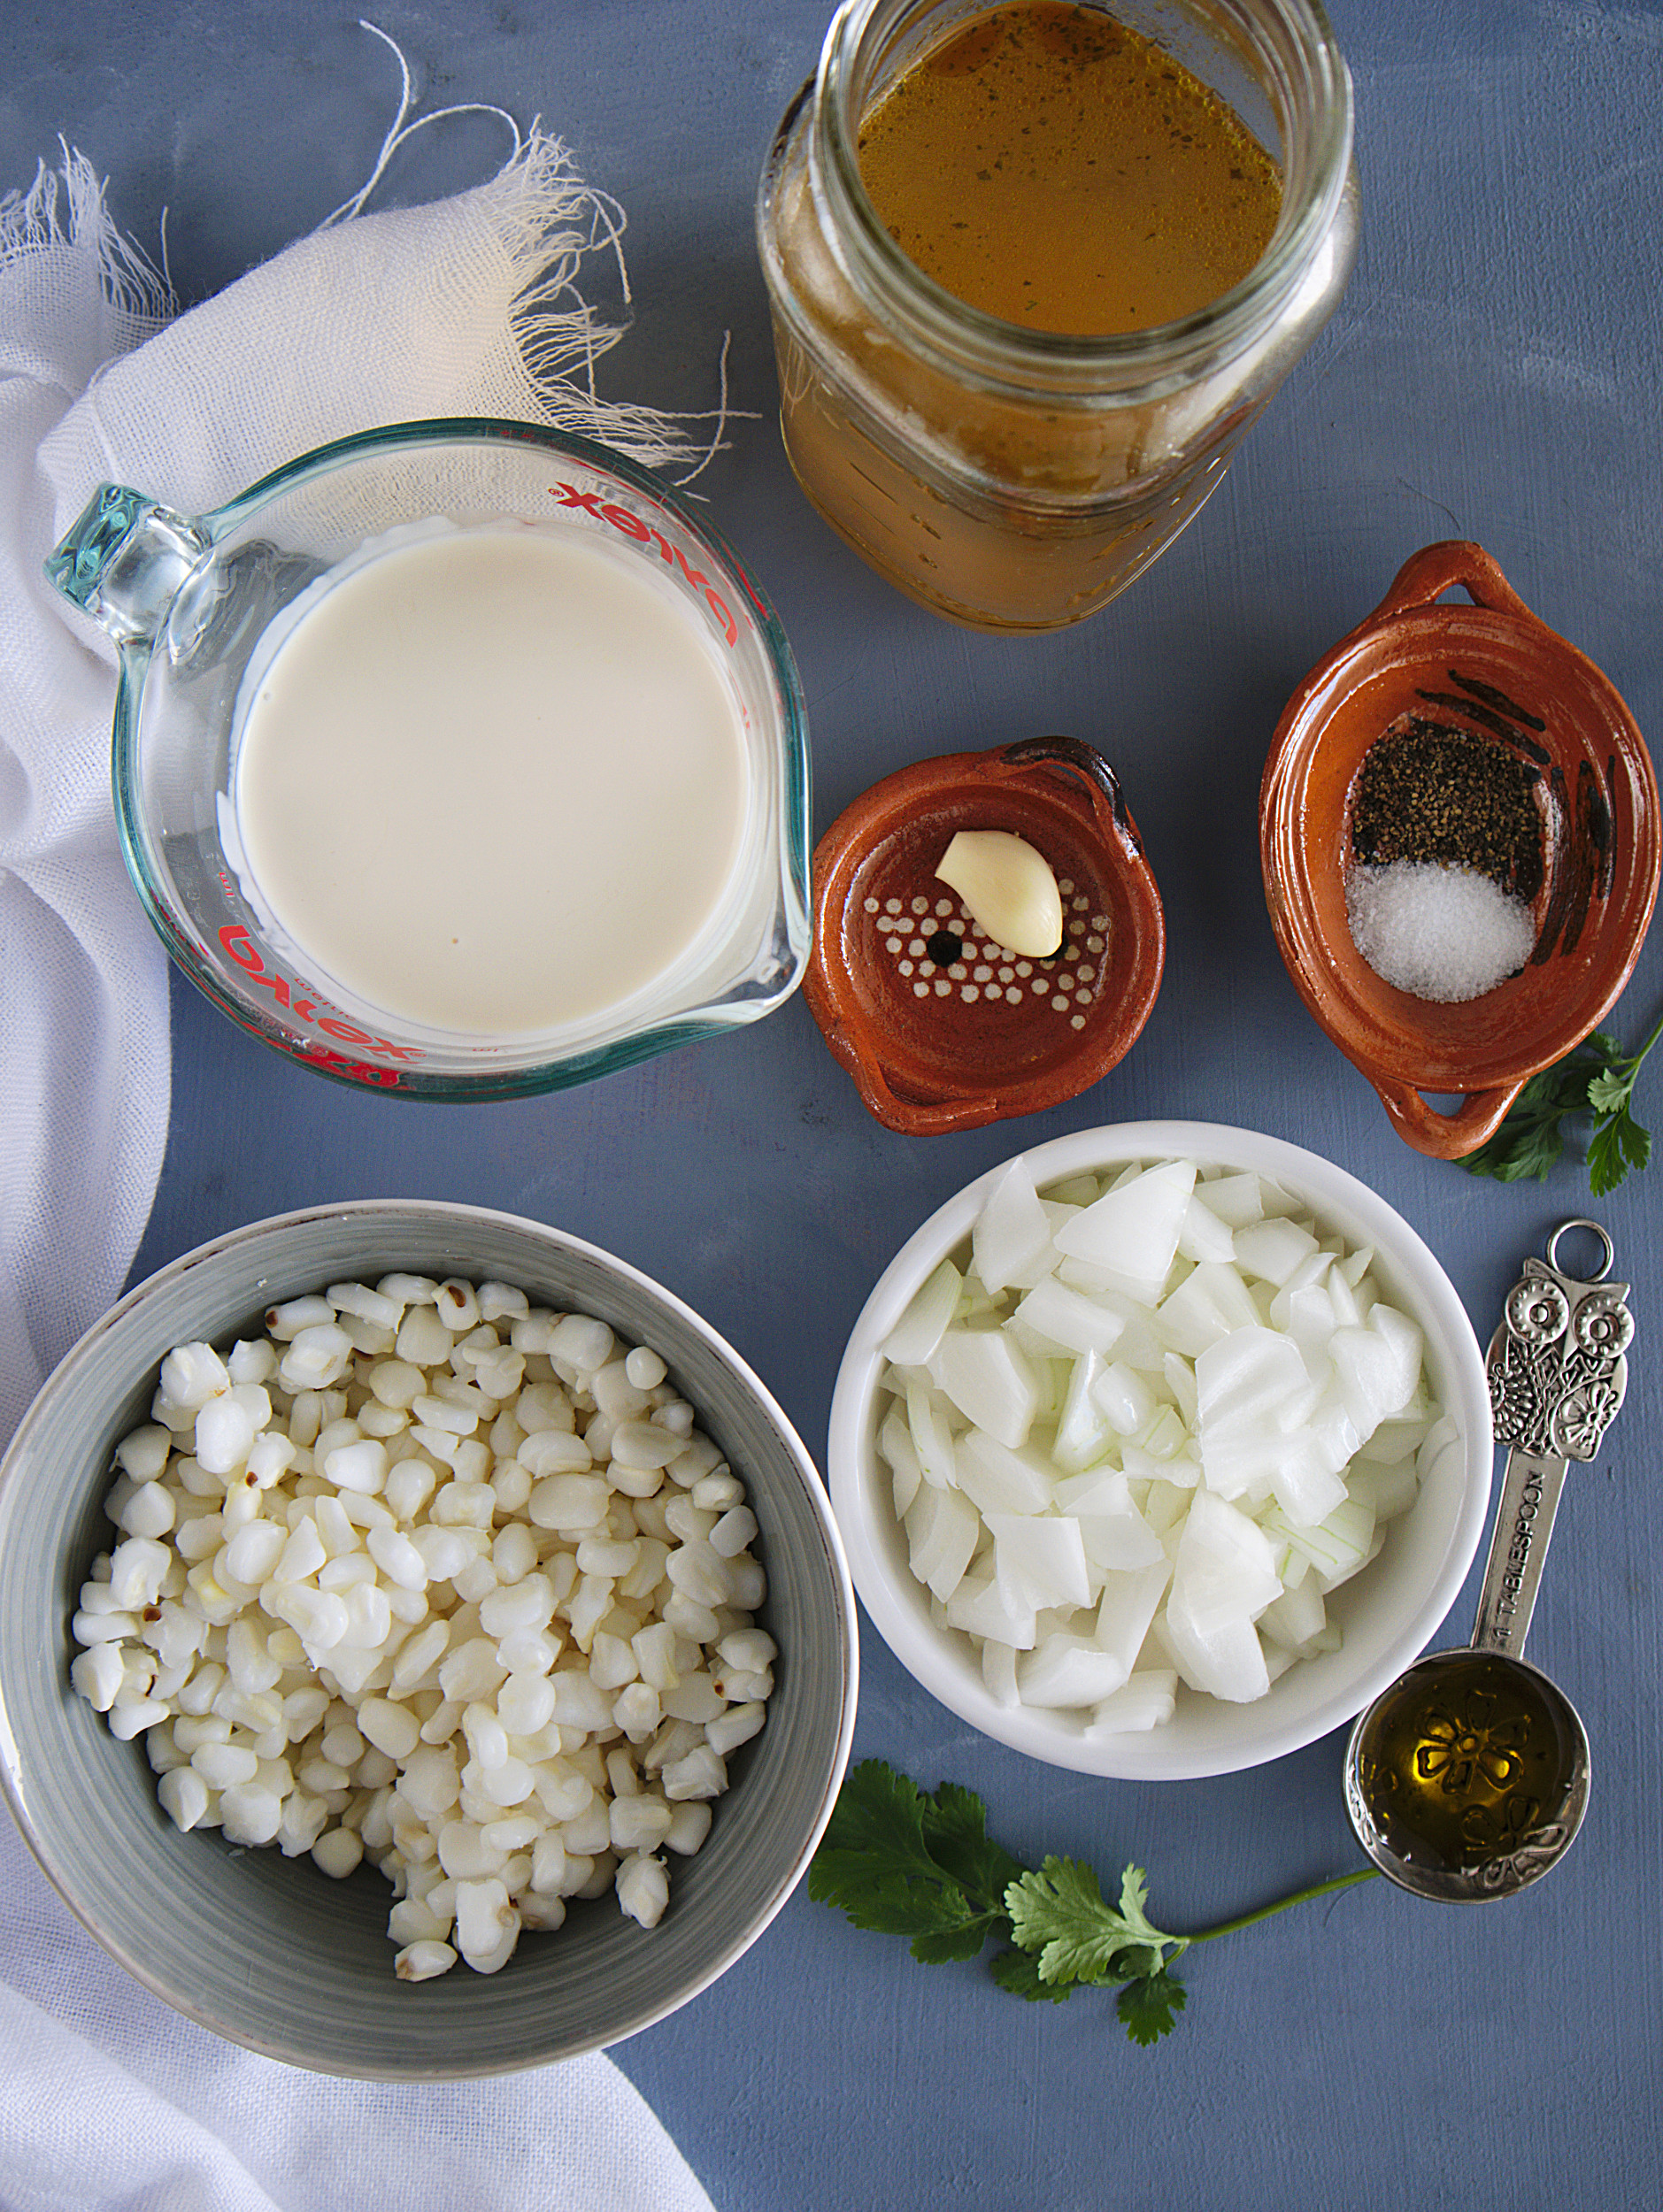 INGREDIENTS NEEDE TO MAKE HOMINY SOUP